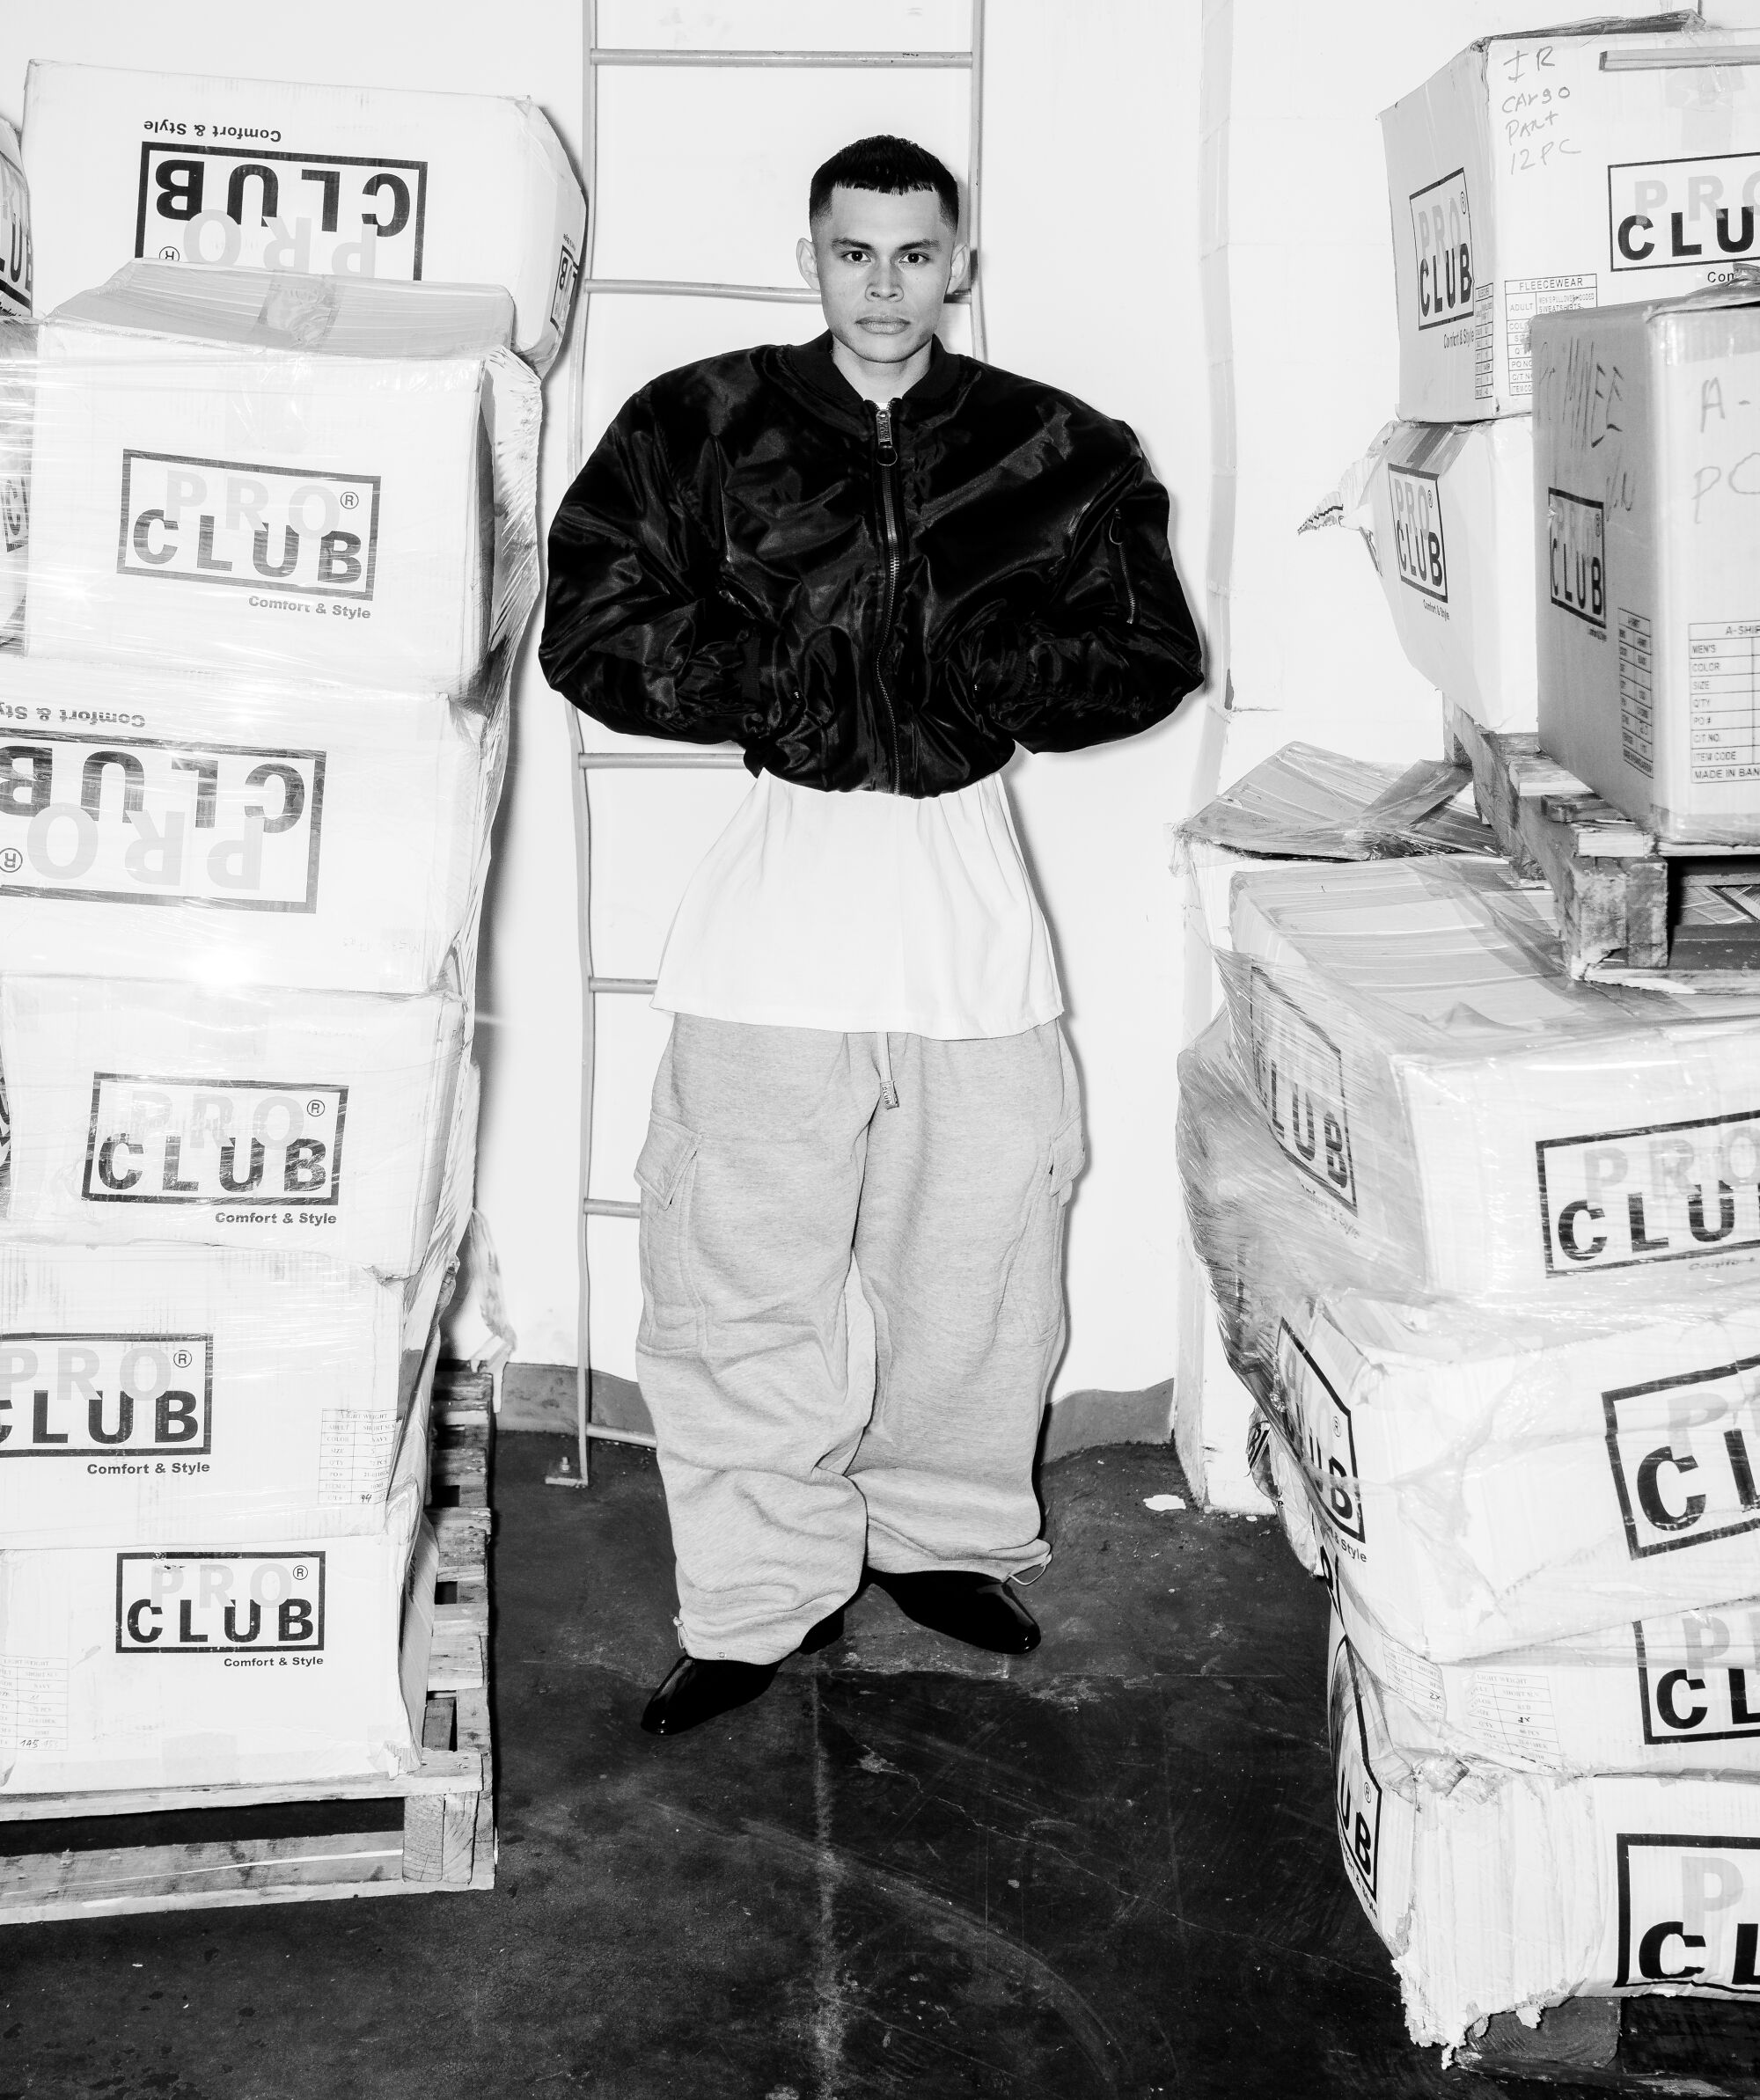 A model stands in a Pro Club warehouse.